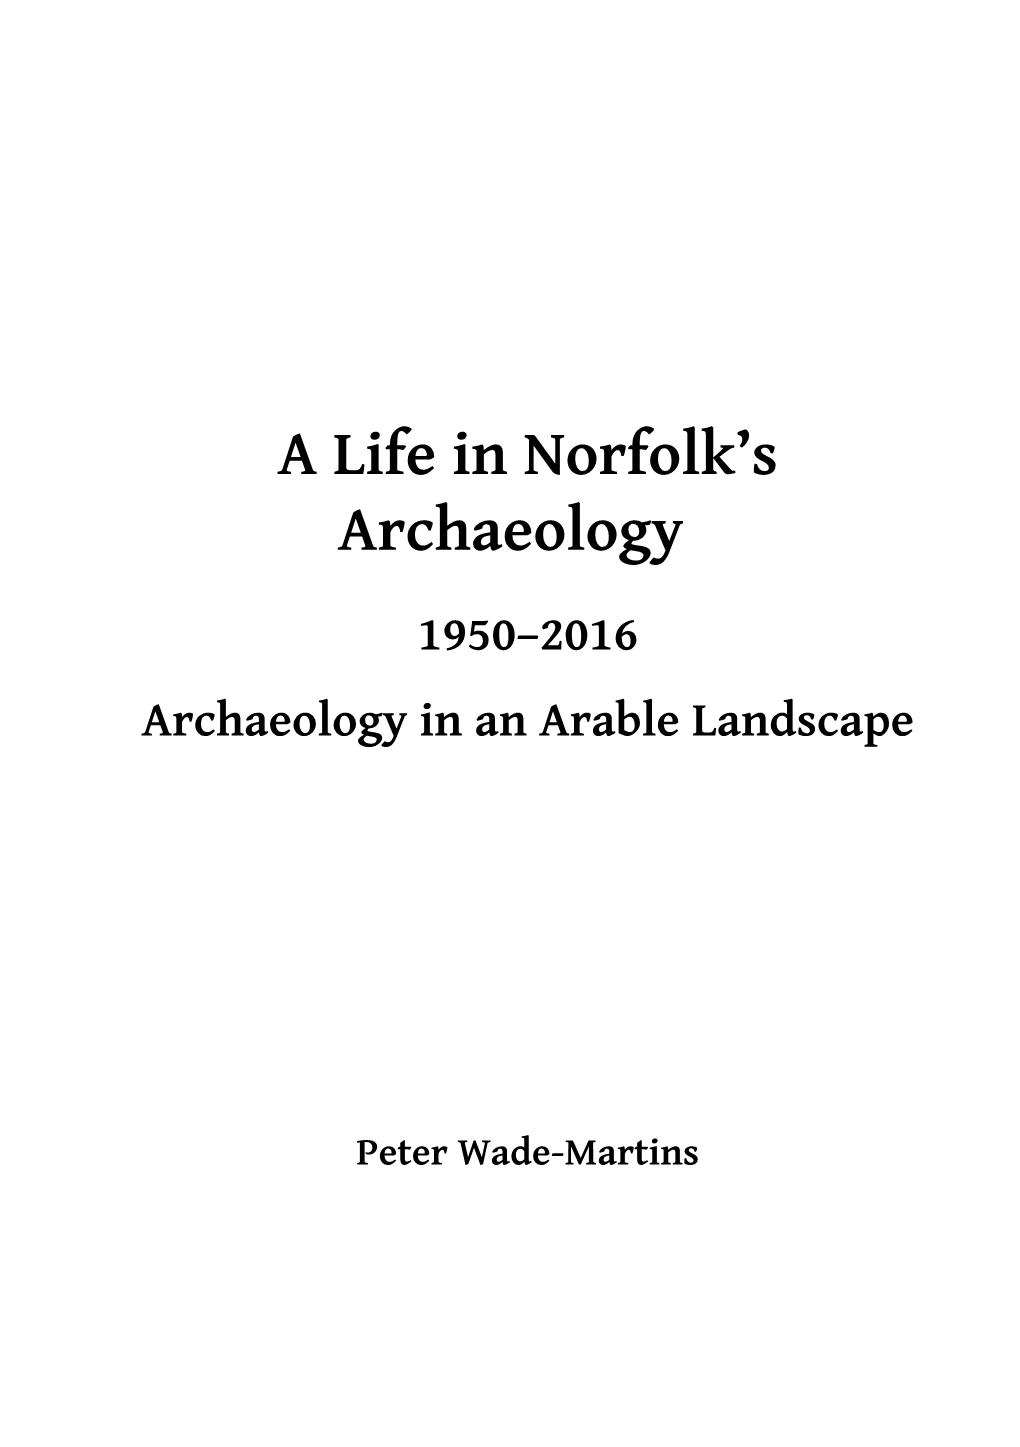 A Life in Norfolk's Archaeology